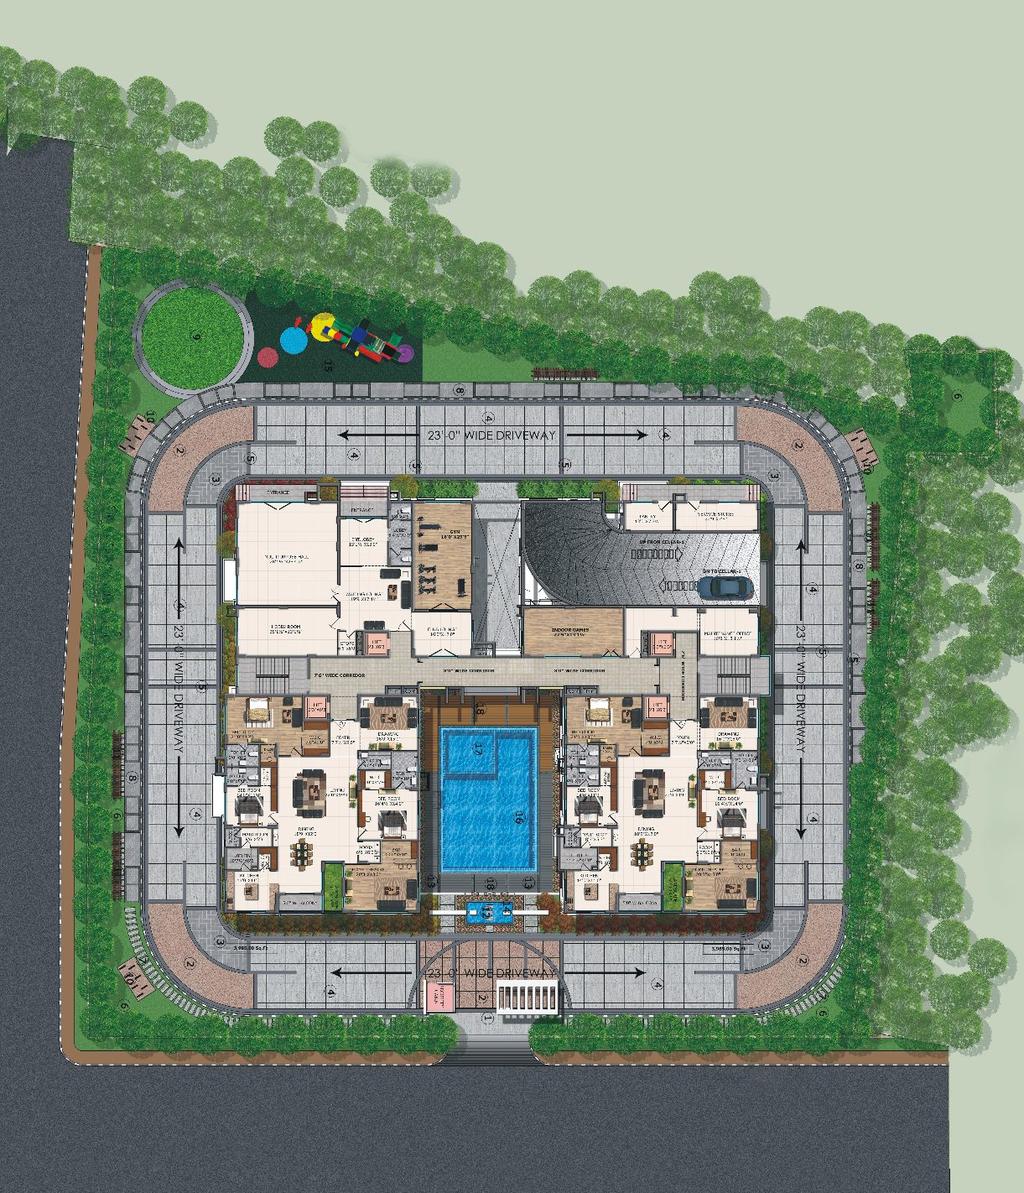 ground floor plan N HIGHLIGHTS 1. MAIN ENTRANCE & EXIT GATE 2. WASH CONCRETE 3. INTERLOCKING PAVERS 4. V.D.F. FLOORING 5. TILE BAND 6. LAWN 7. STEPPING STONES AS PATHWAY 8.